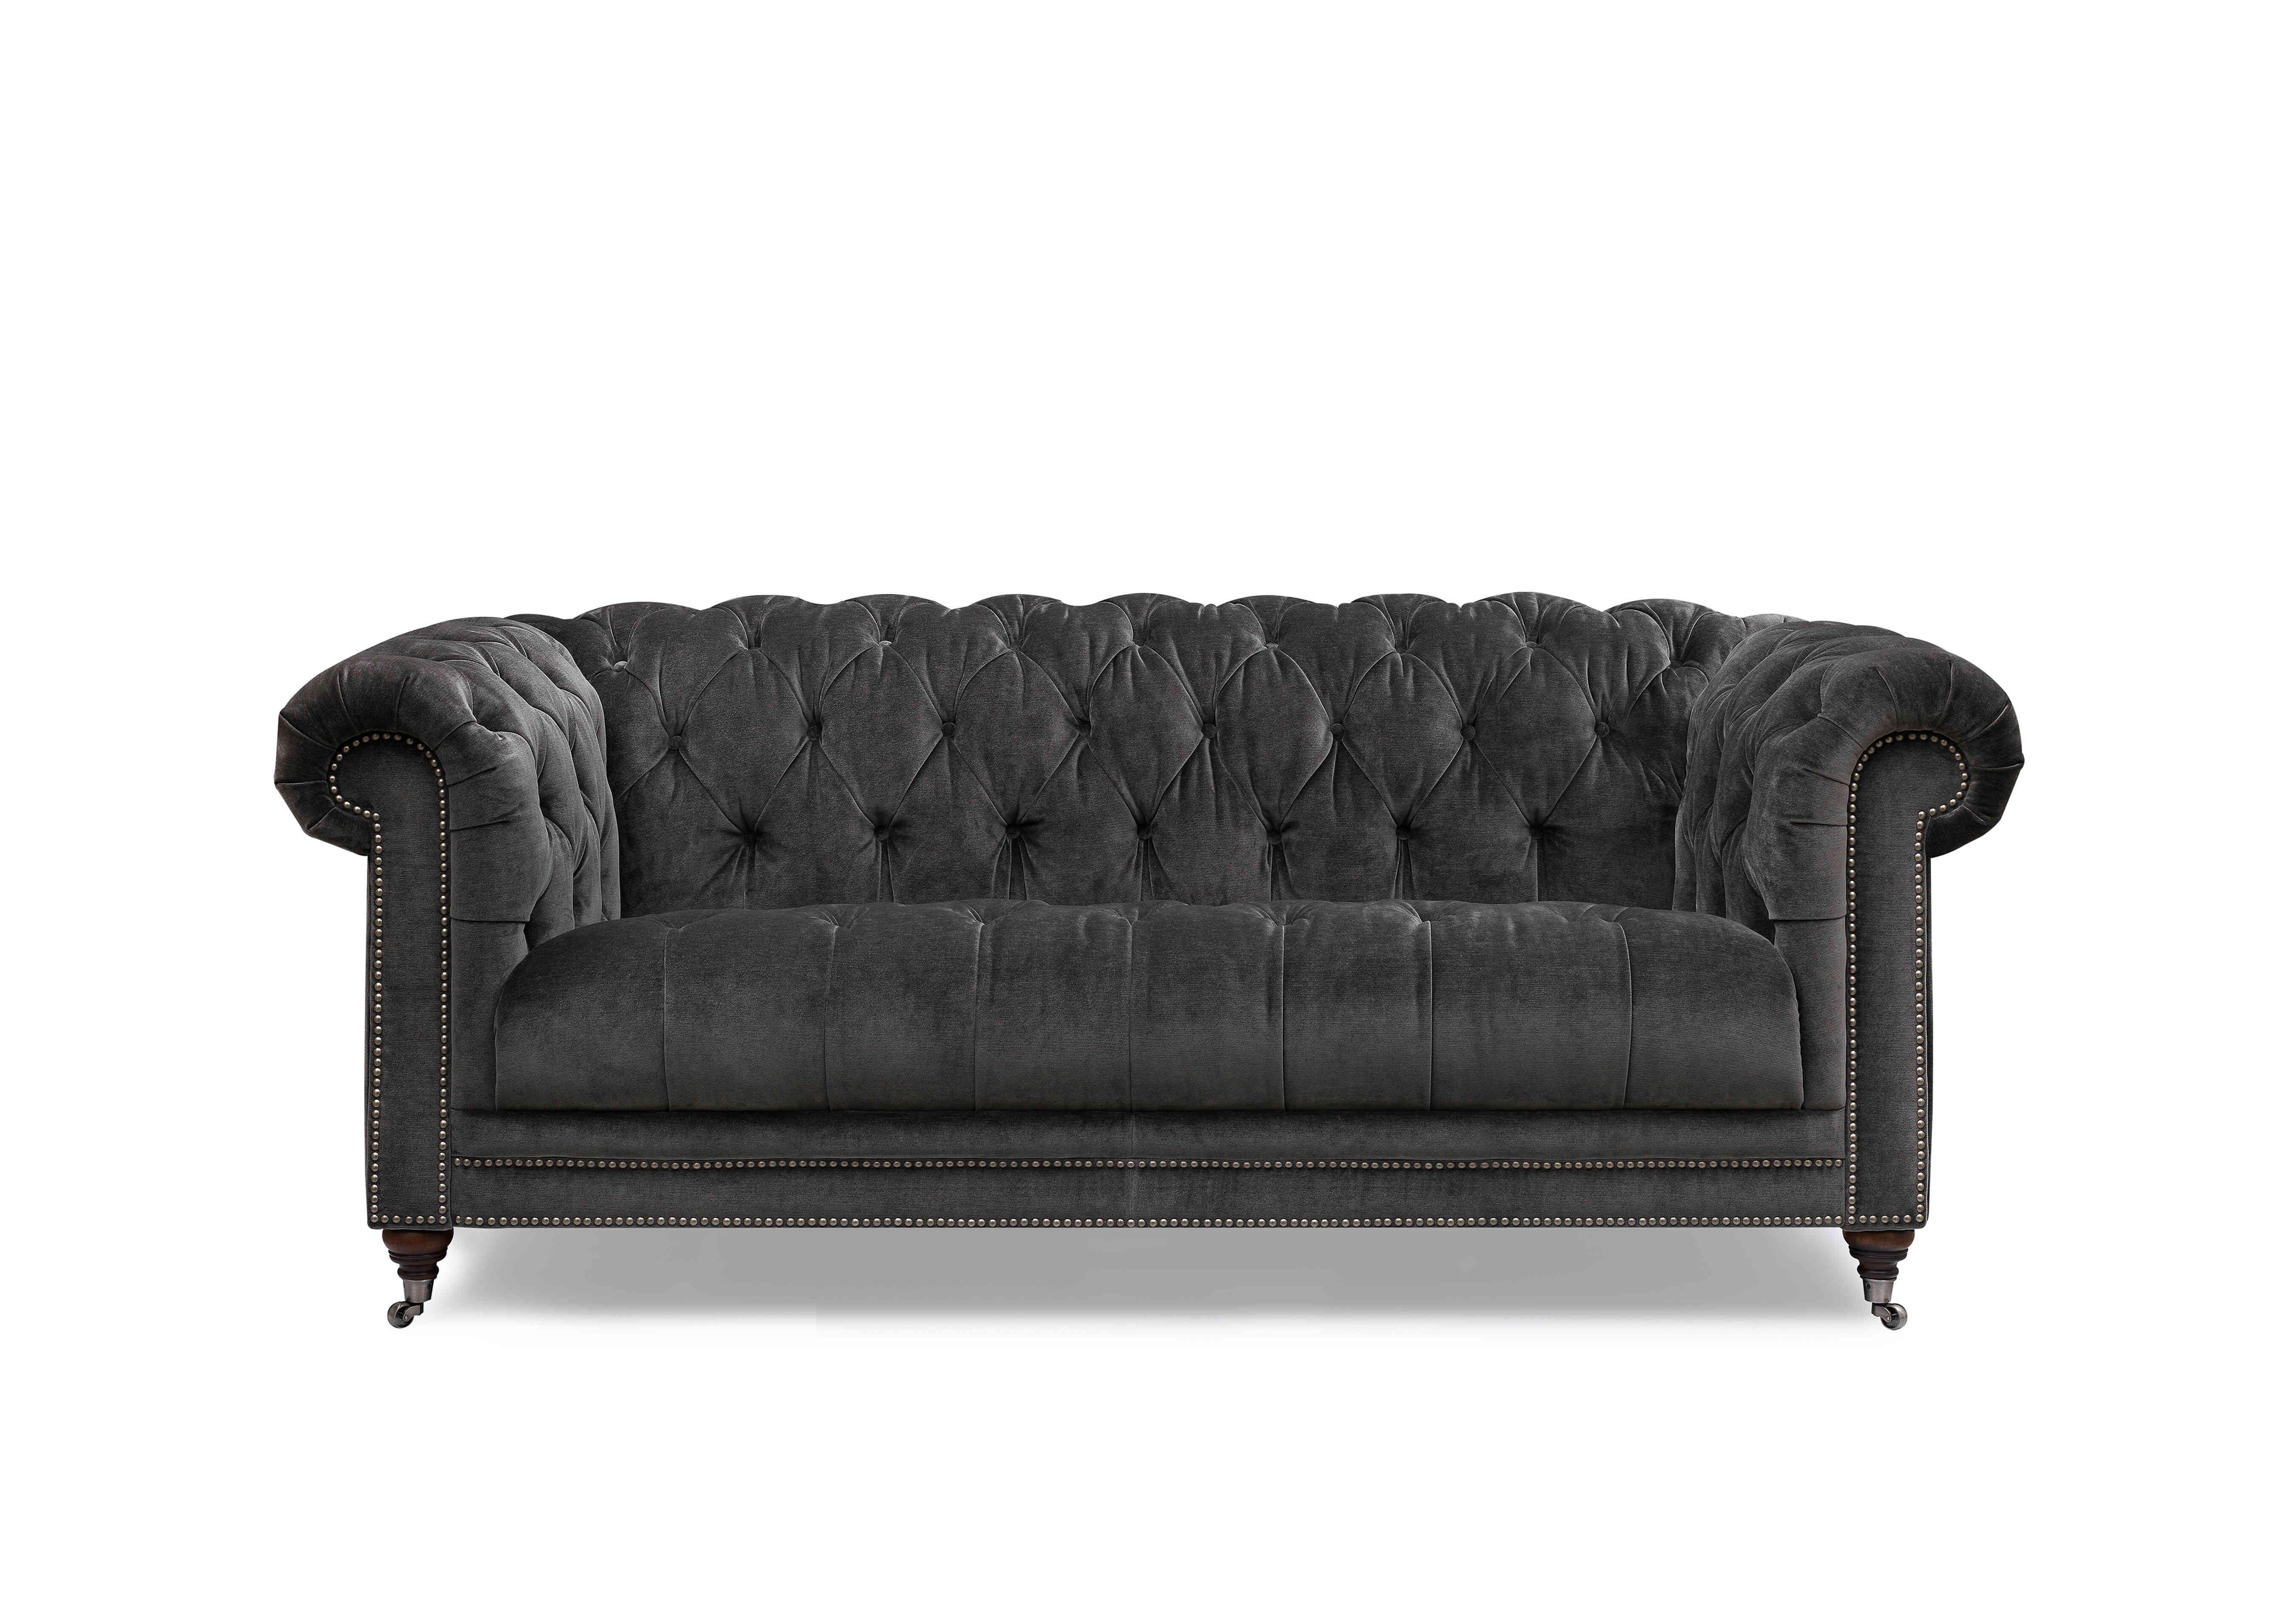 Walter 3 Seater Fabric Chesterfield Sofa in X3y2-W021 Moonstone on Furniture Village